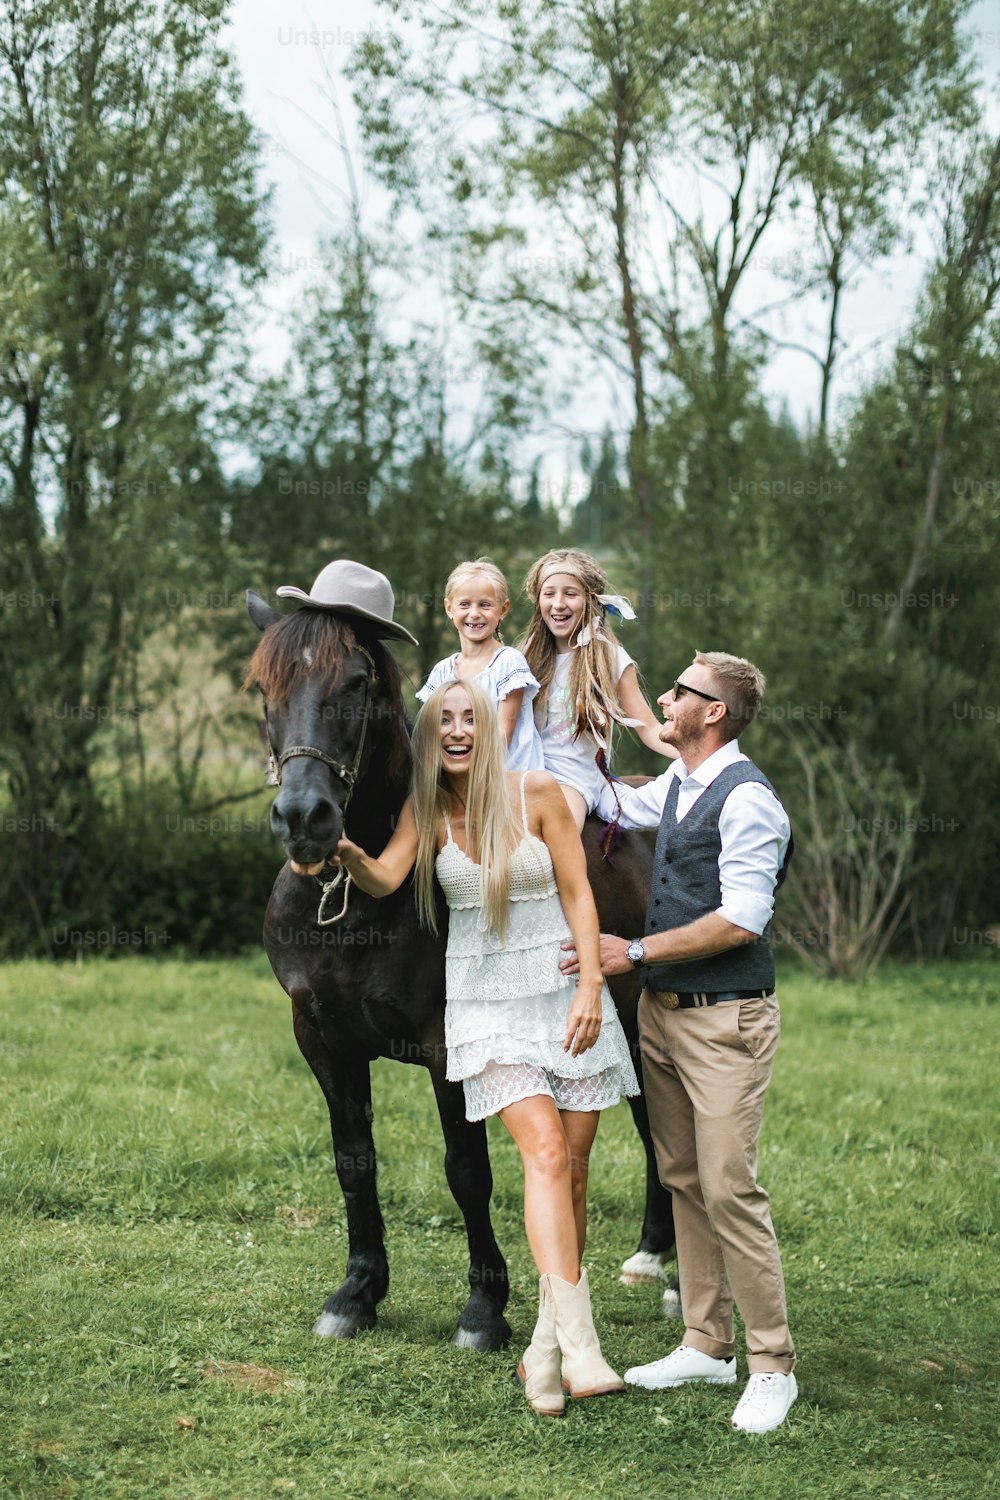 Happy family, parents and children, enjoying the horse presence. Girls are riding the horse, wearing hat. Man and woman parents having fun and laughing. Countryside, horse riding outdoors.